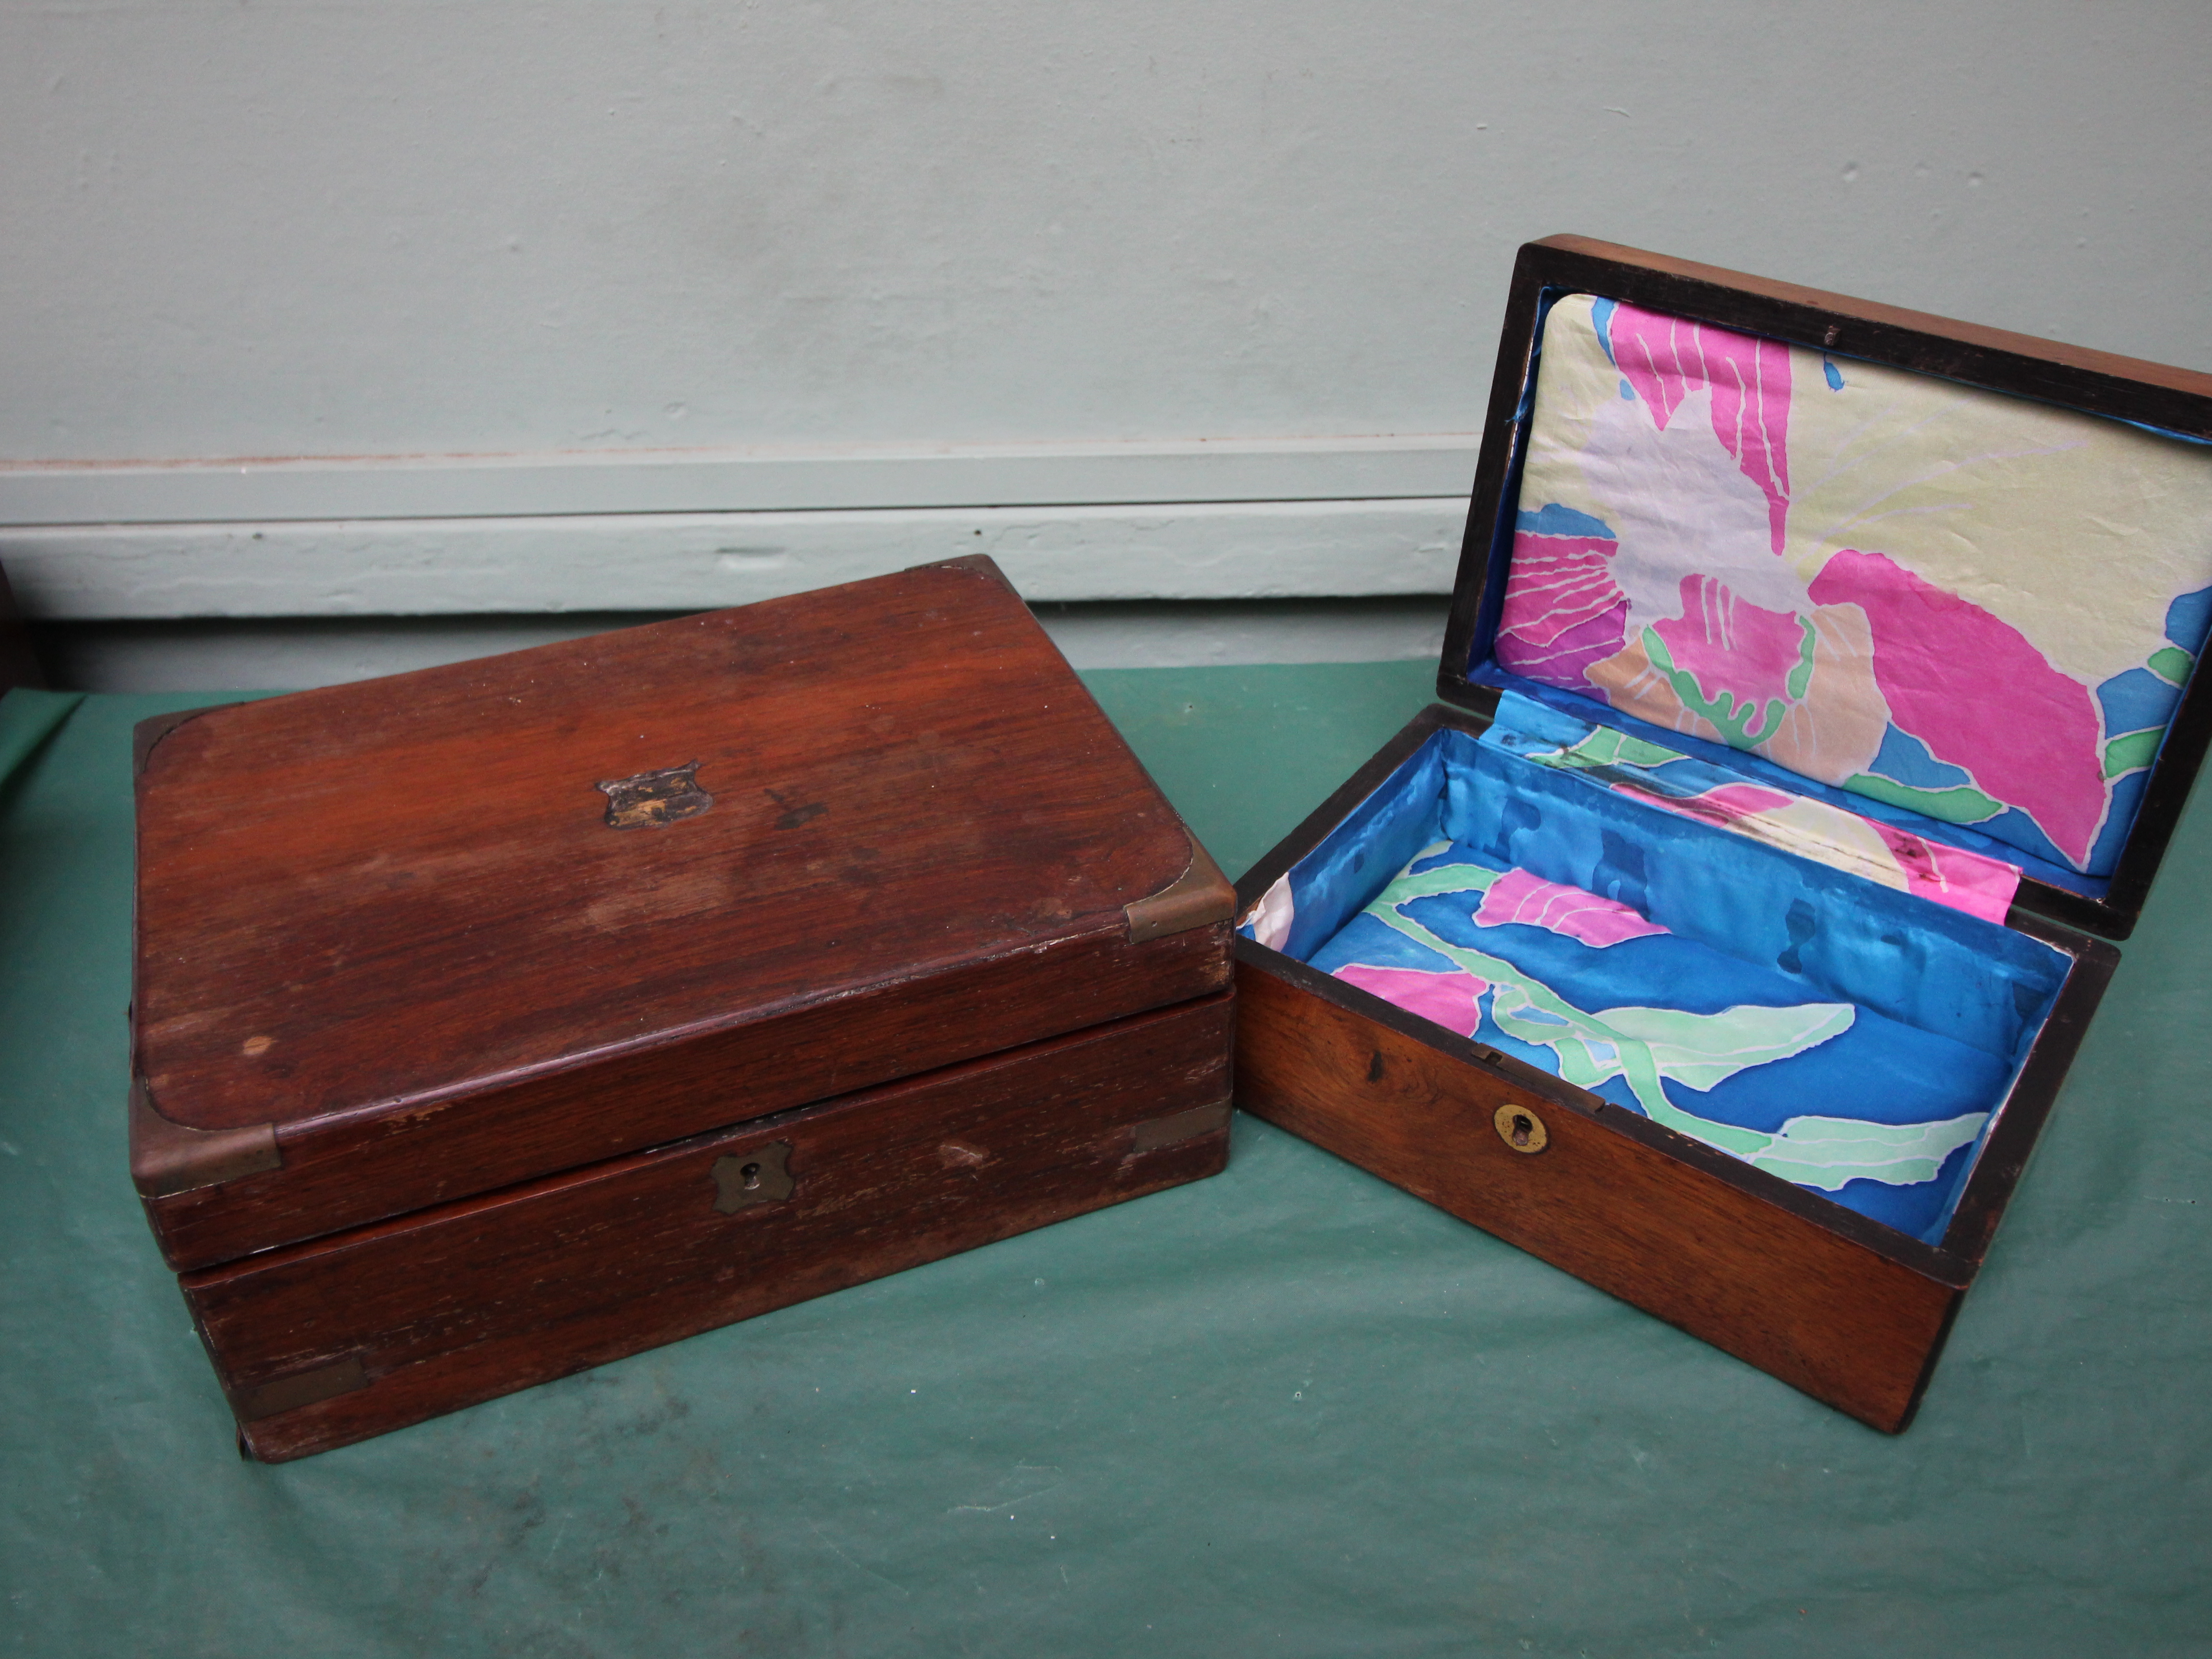 Rosewood jewellery box with mother of pearl inlay and an oak and brass hinged writing box - Image 2 of 3